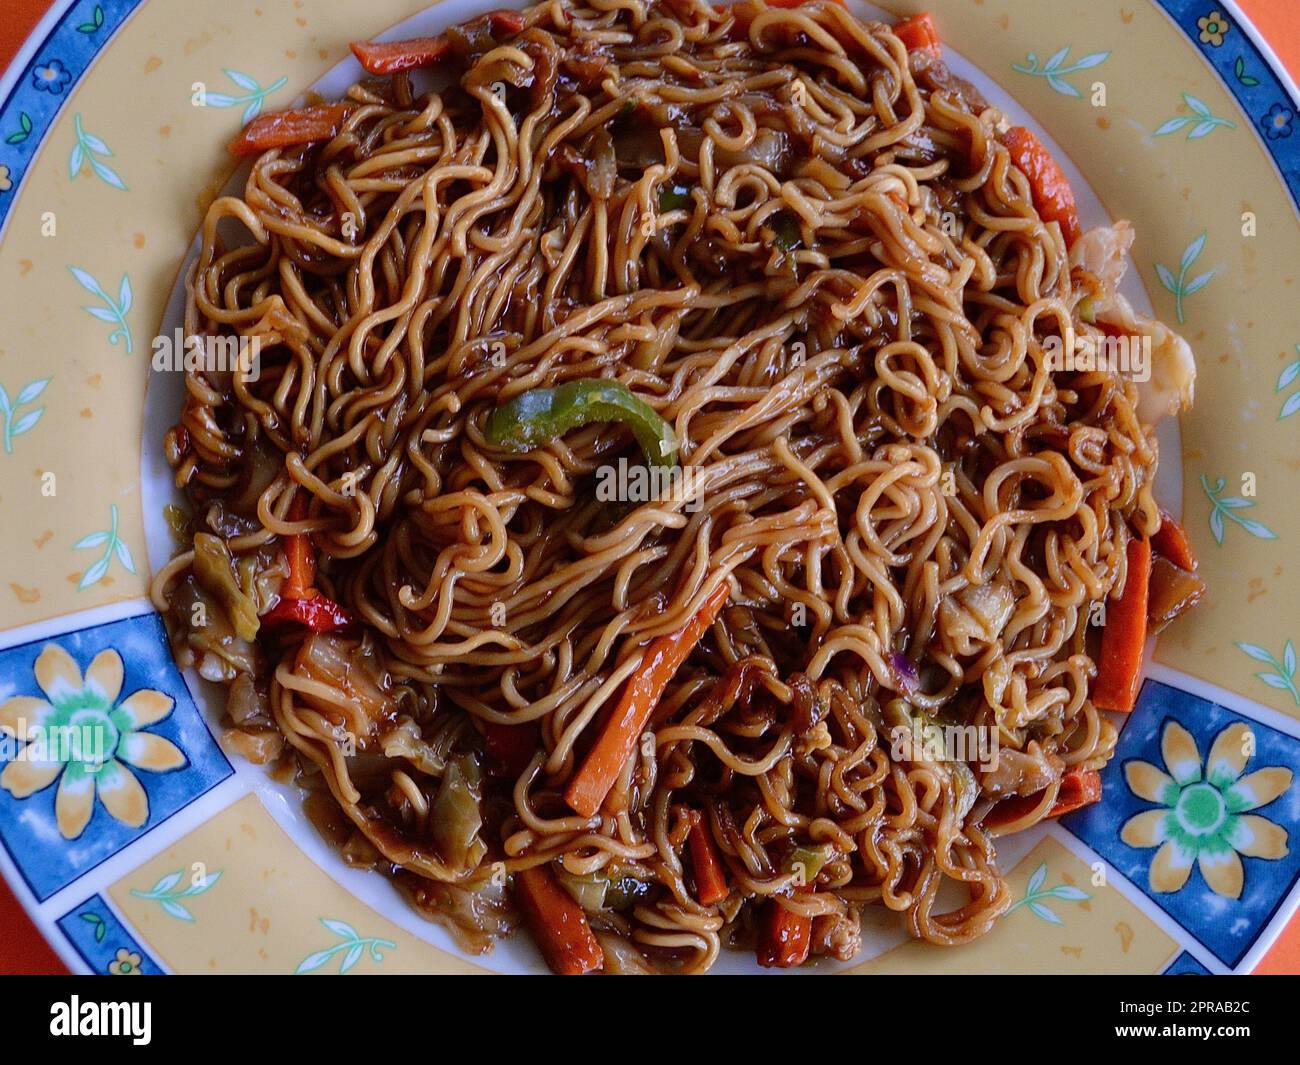 Mi Goreng on a colorful plate Stock Photo